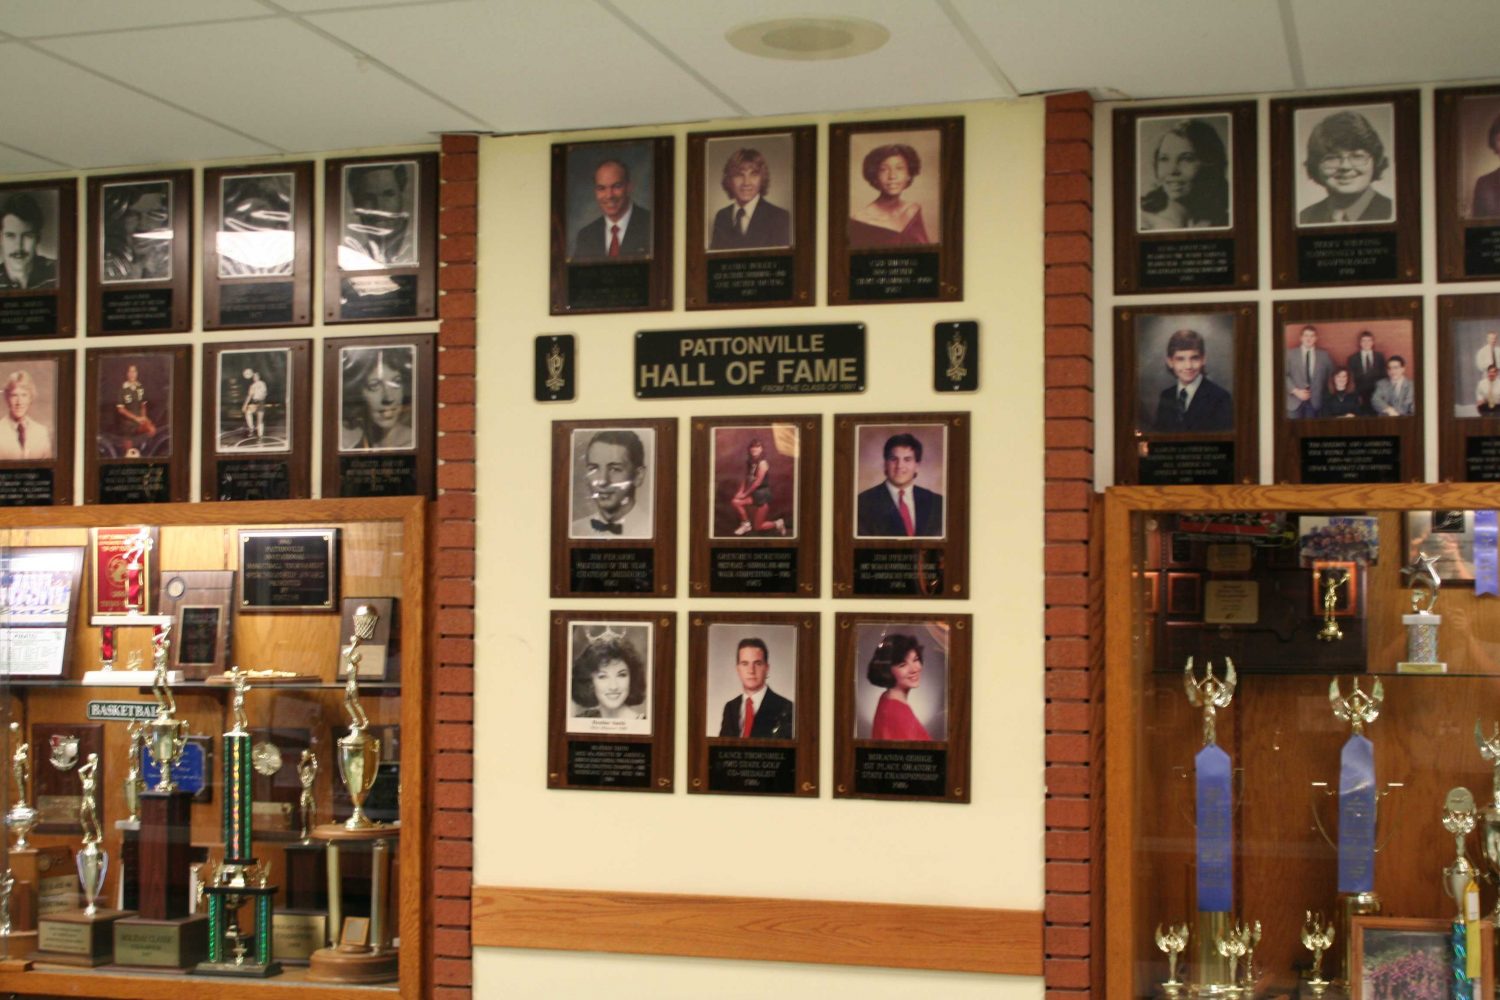 The wall includes pictures of notable alumni and trophies and awards.